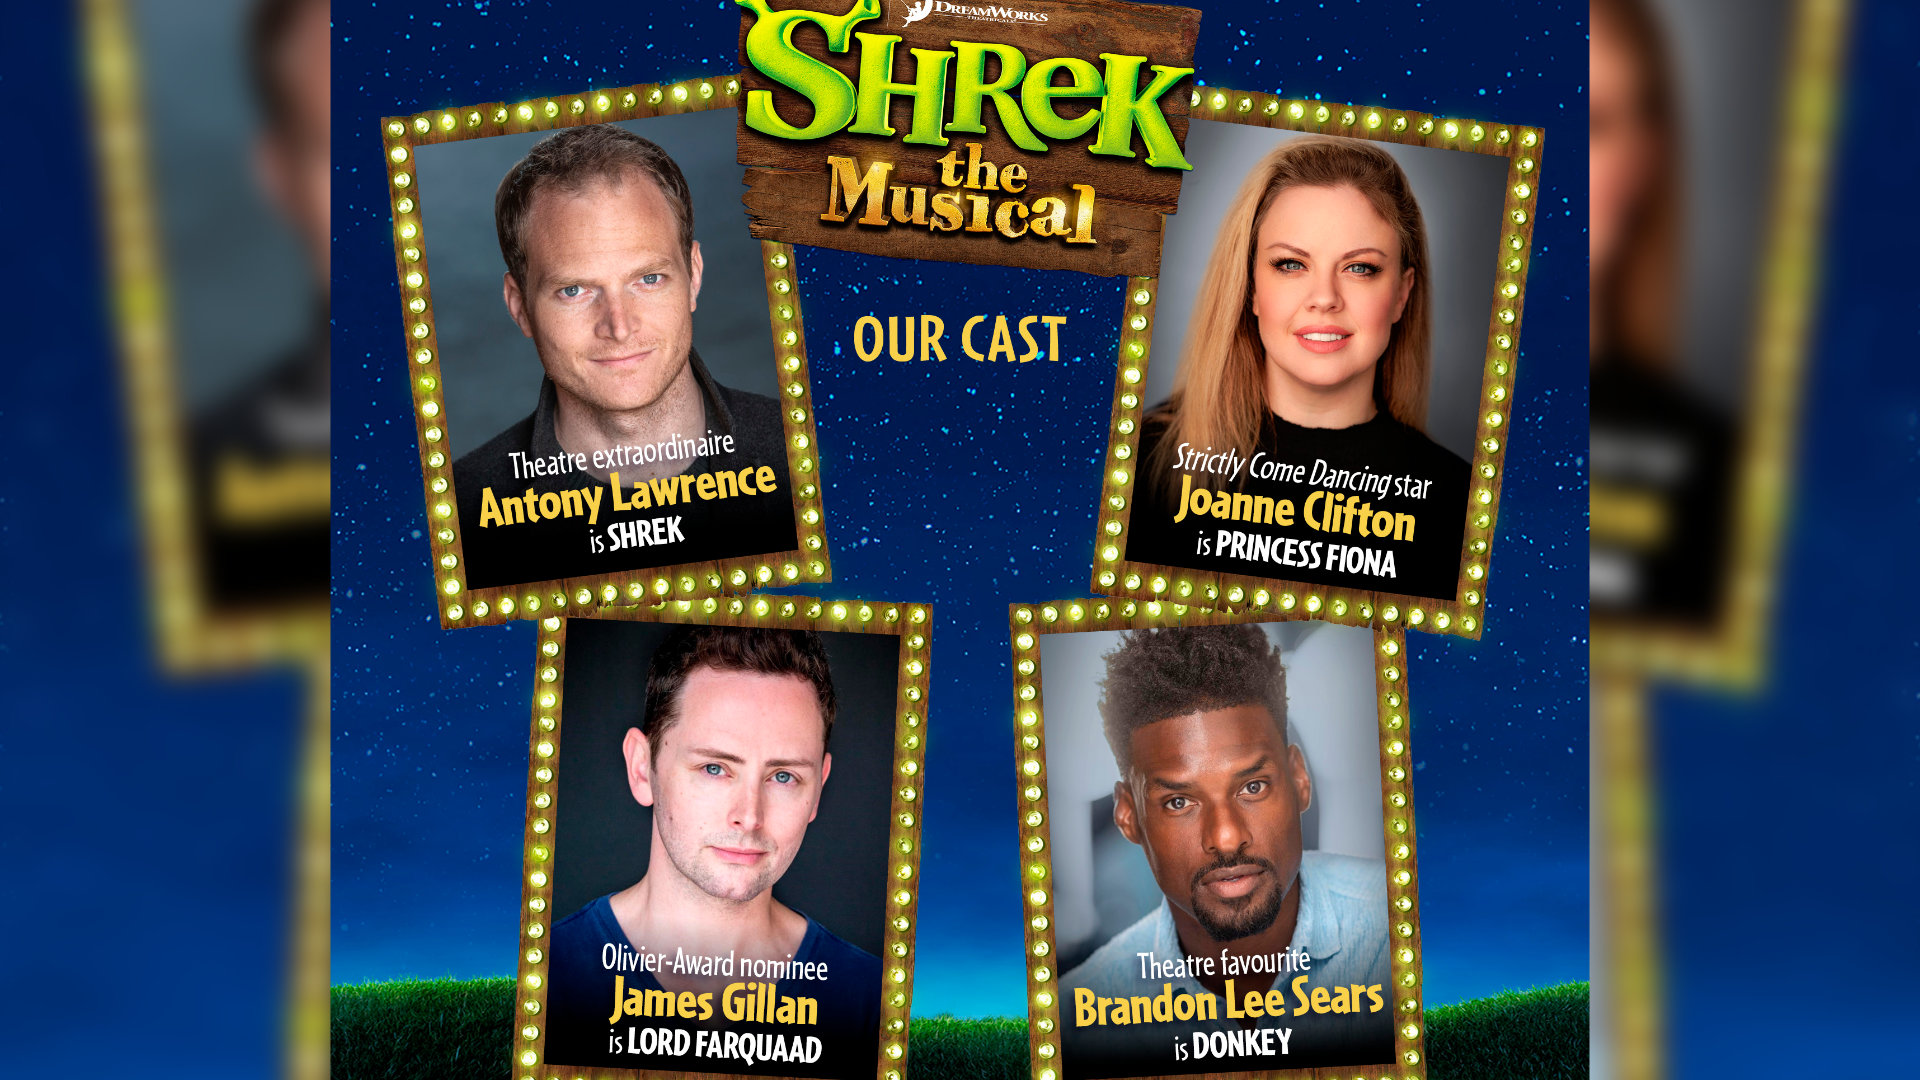 Shrek the Musical UK tour cast announced with Joanne Clifton Stage Chat